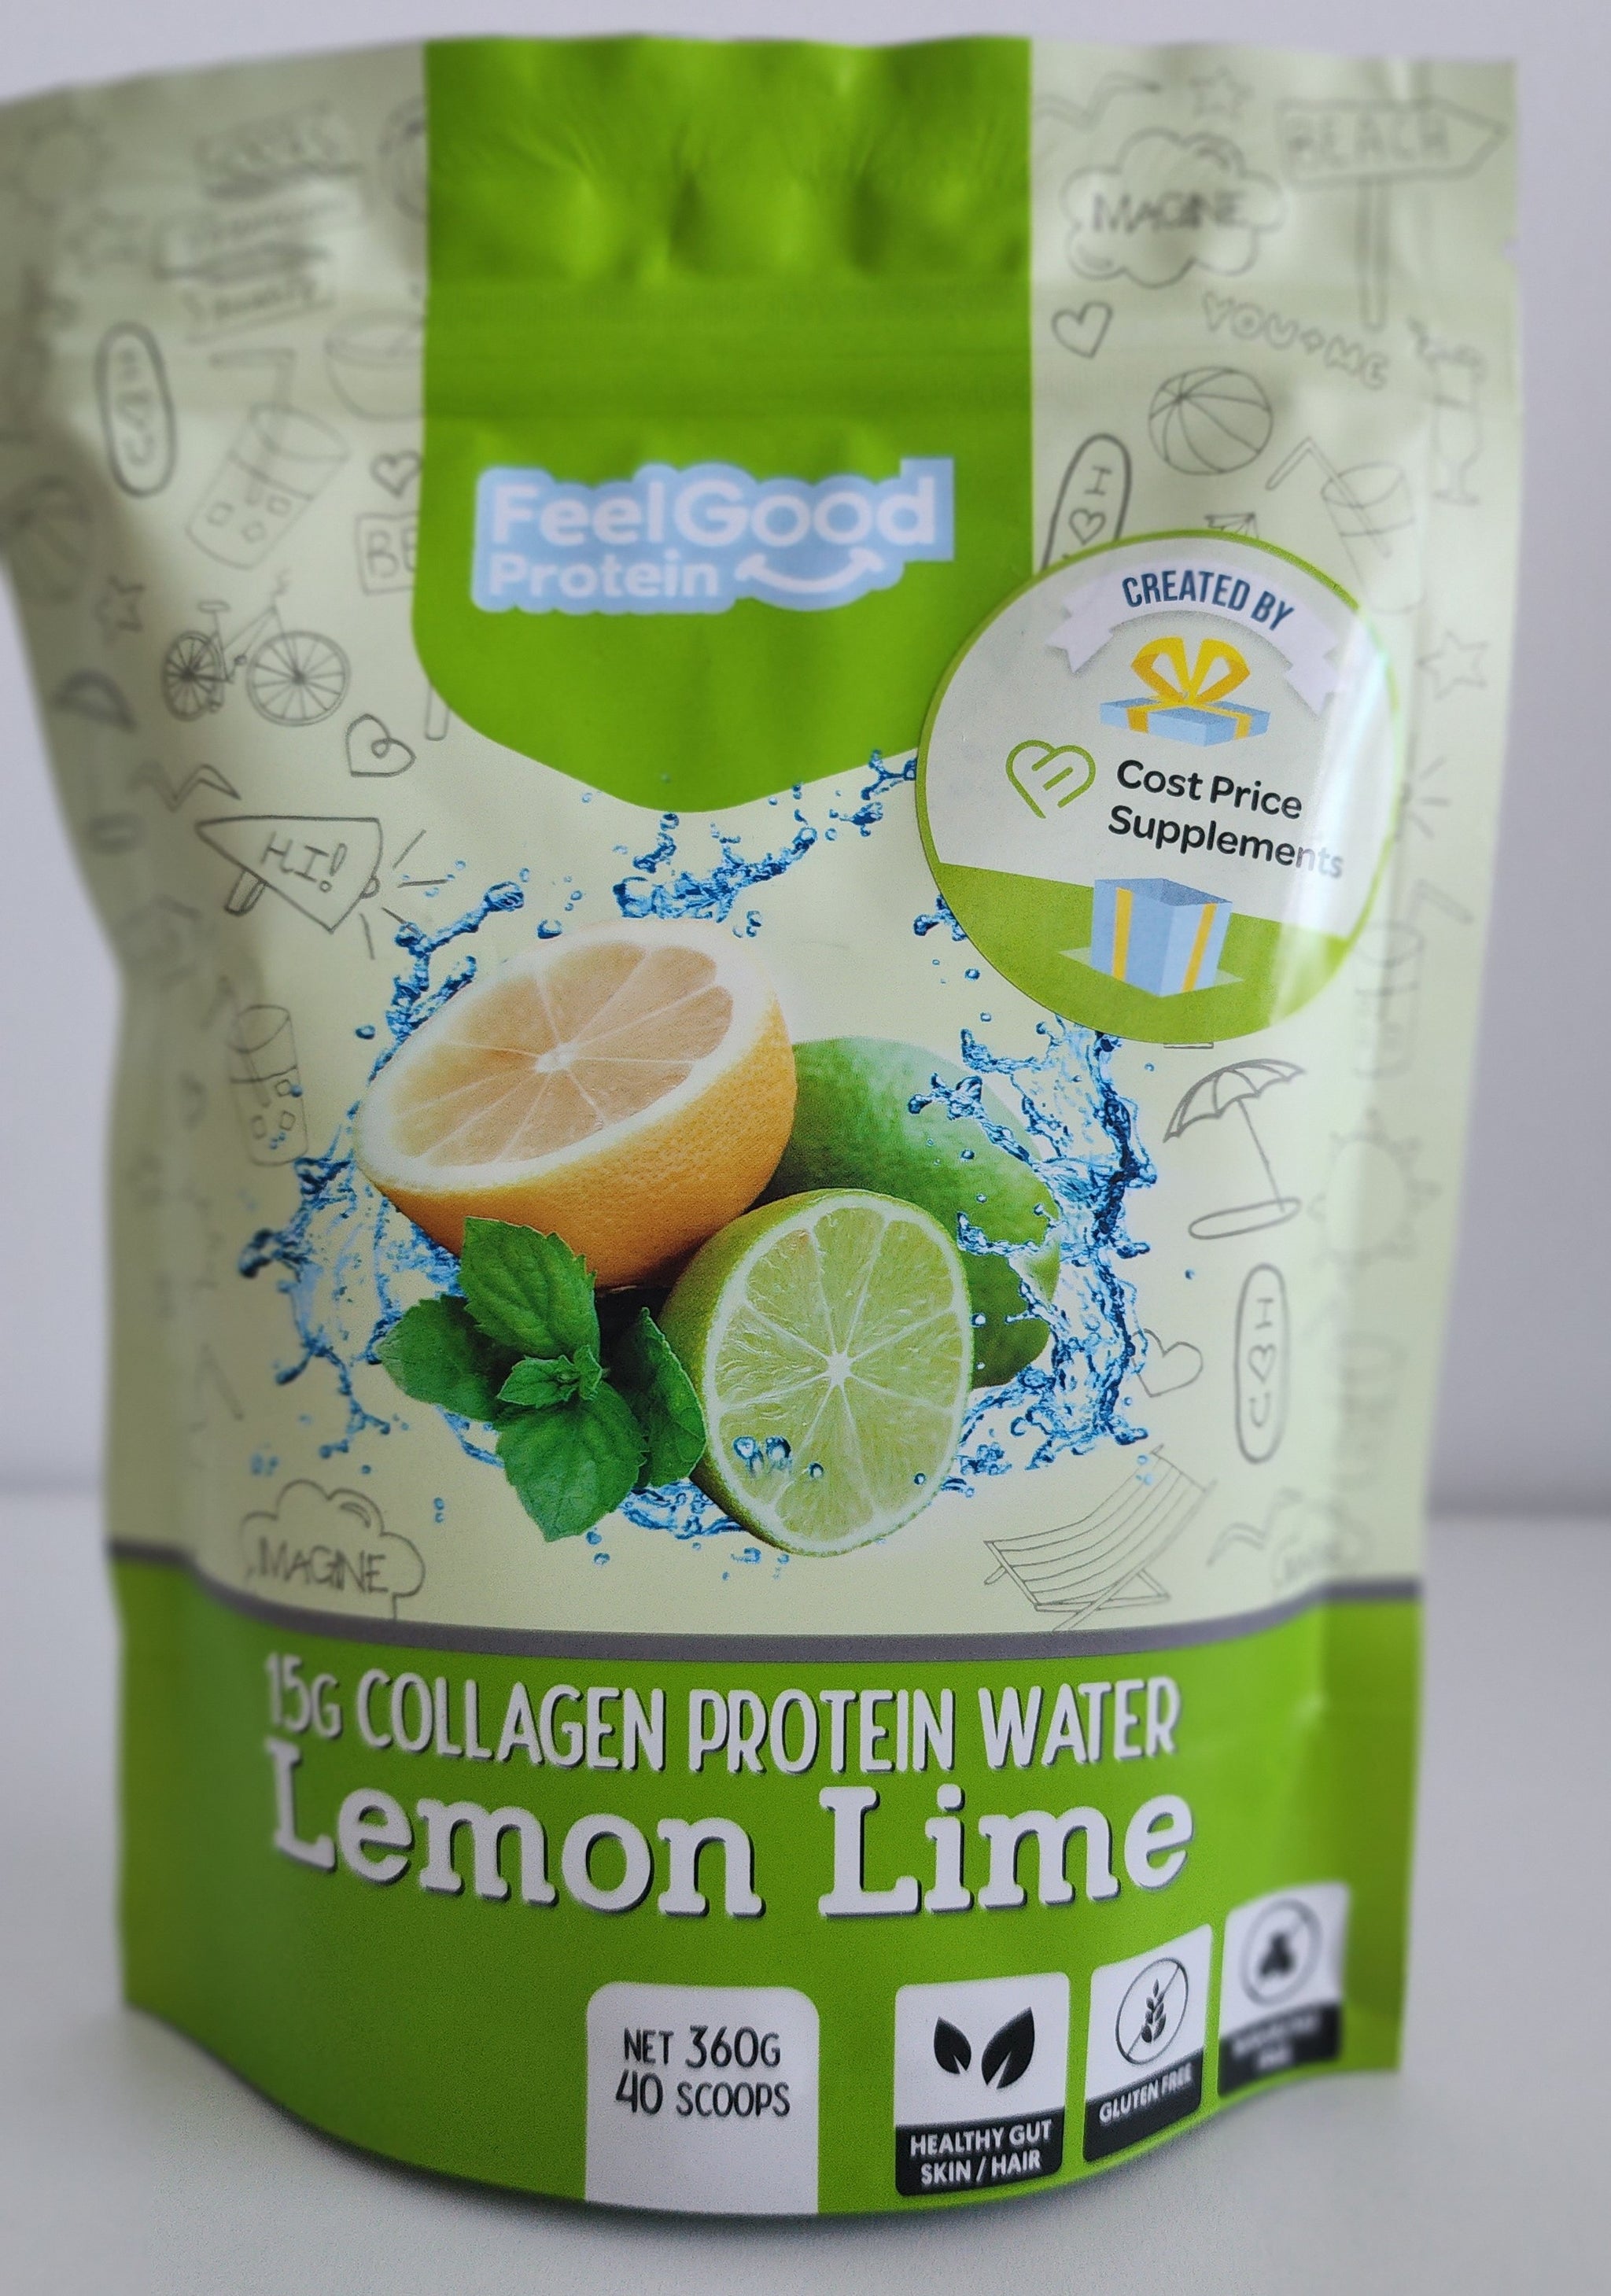 Feel Good Collagen Protein Water | Free Shipping